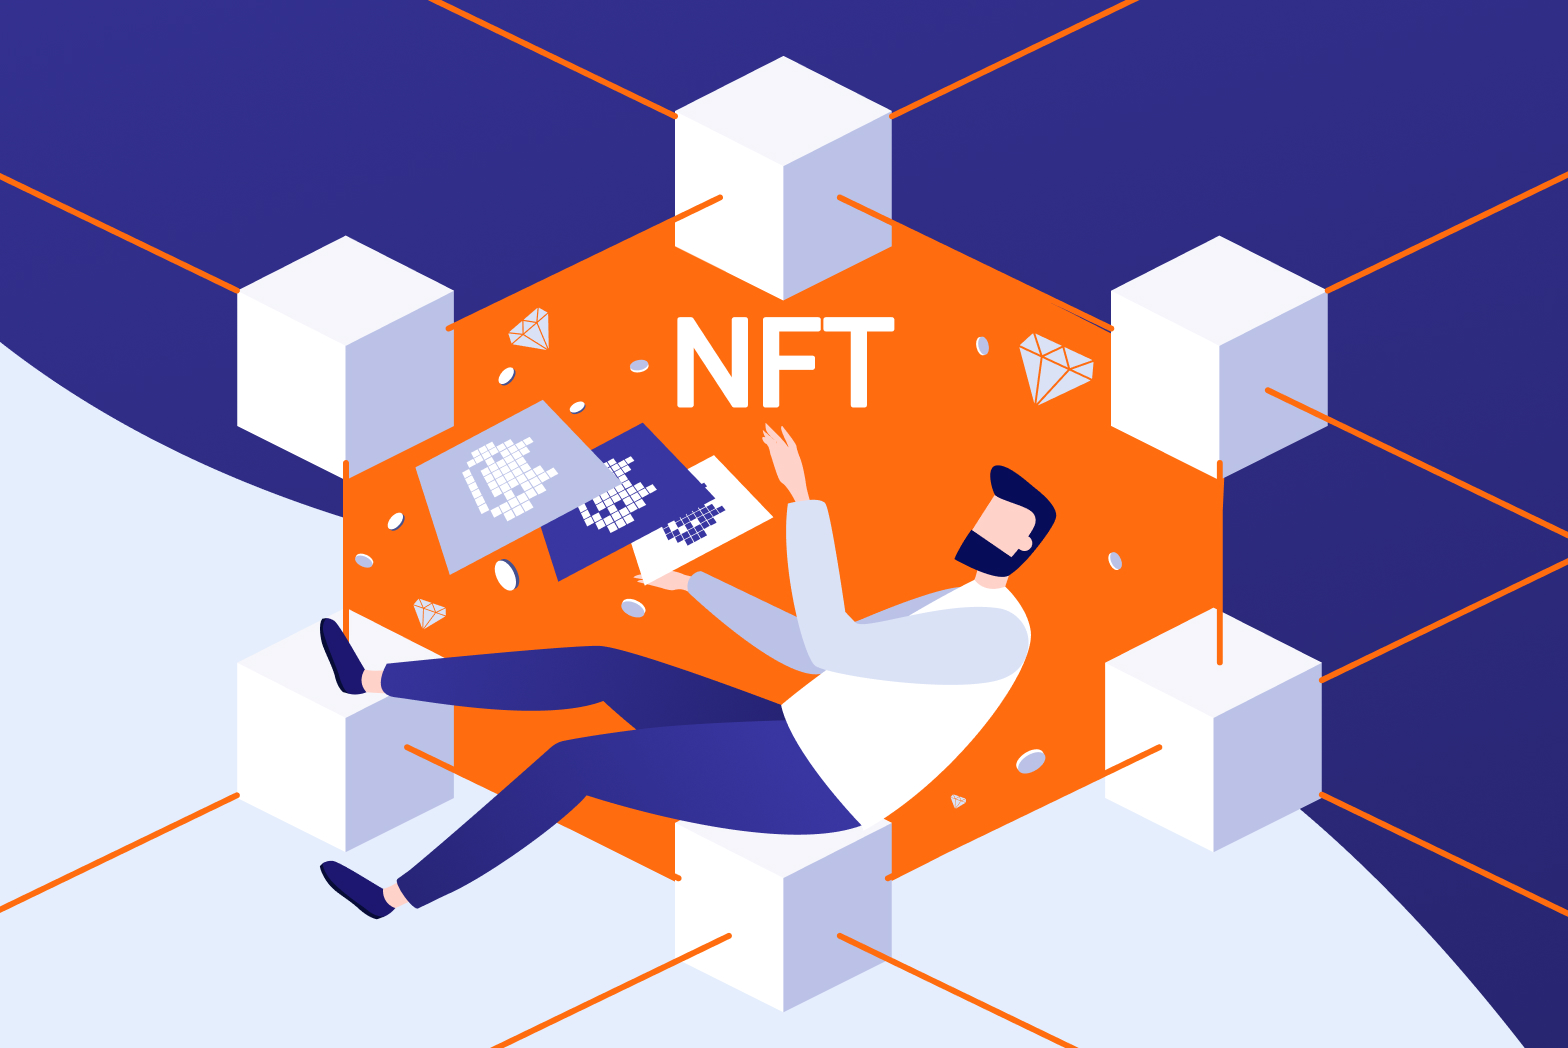 assurances against piracy of the assets provided by blockchain technologies and NFTs